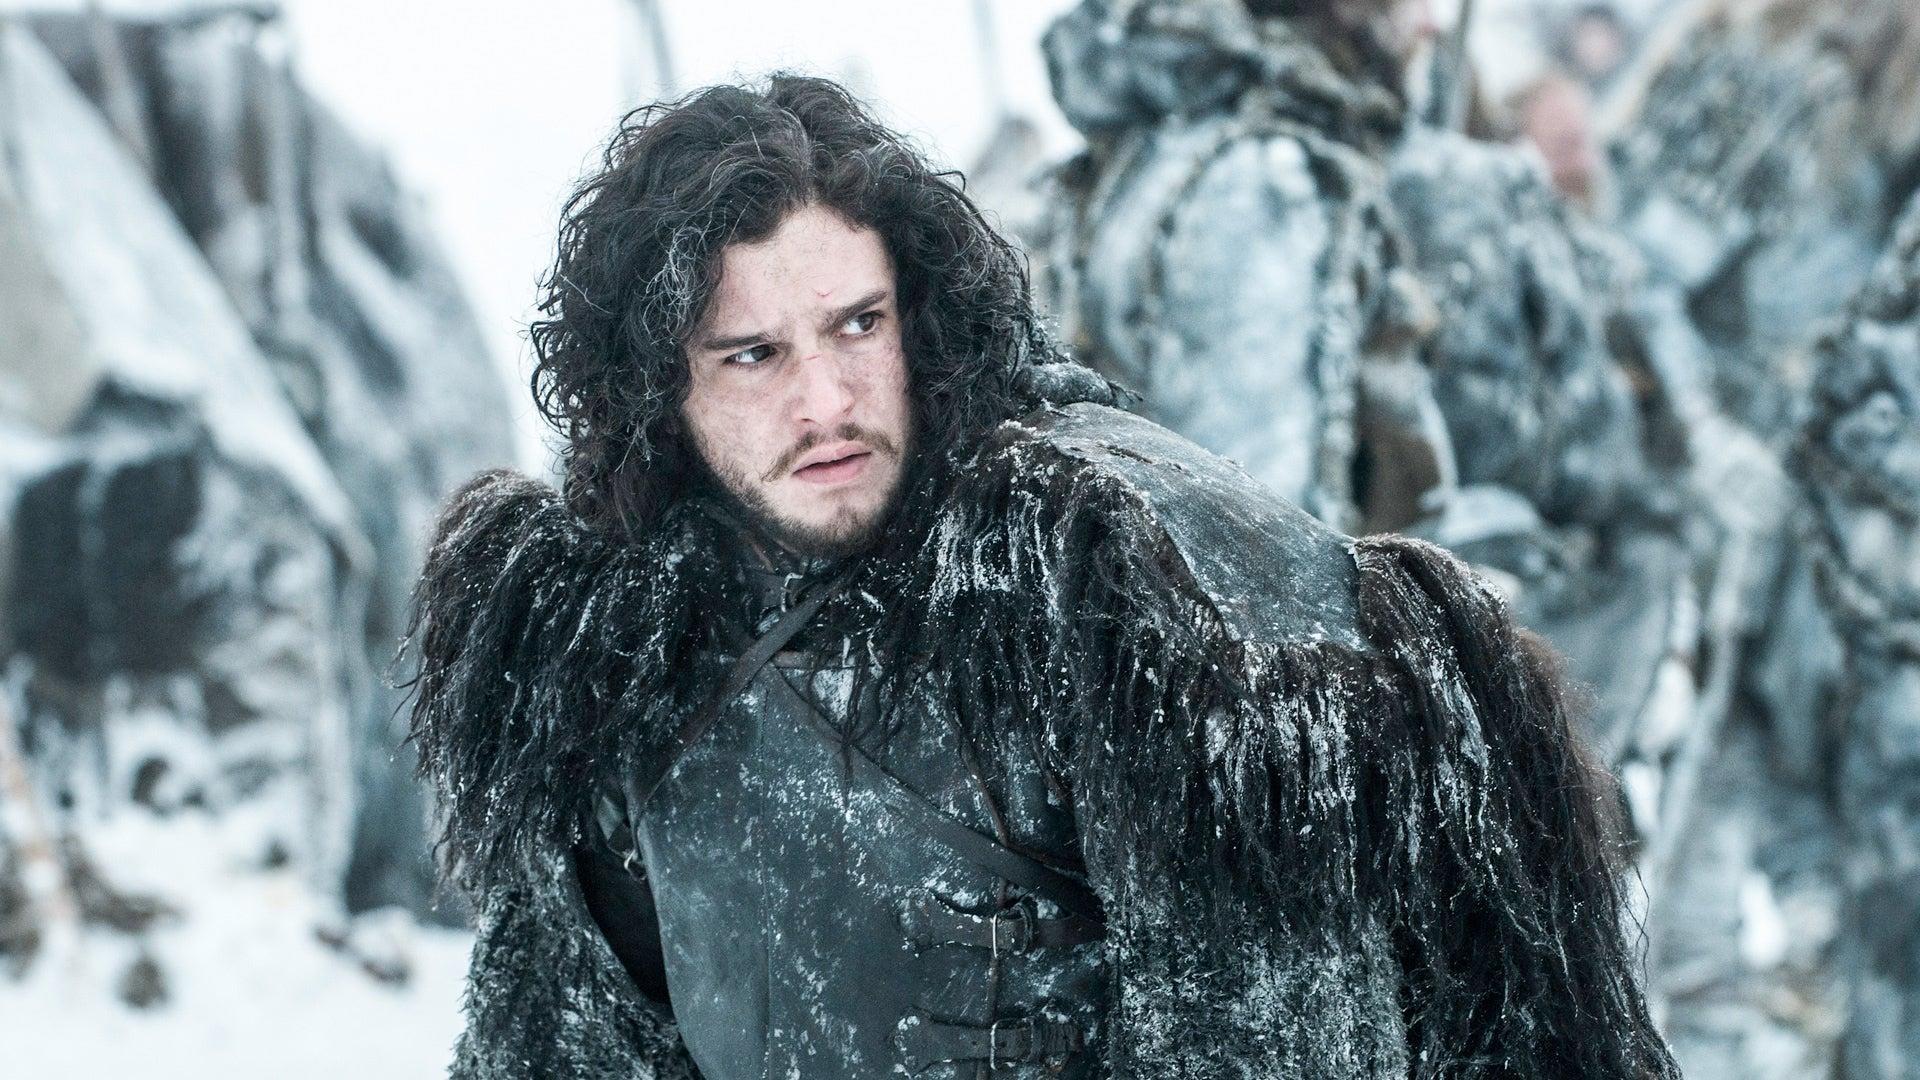 What We Know So Far About the Jon Snow 'Game of Thrones' Sequel Series